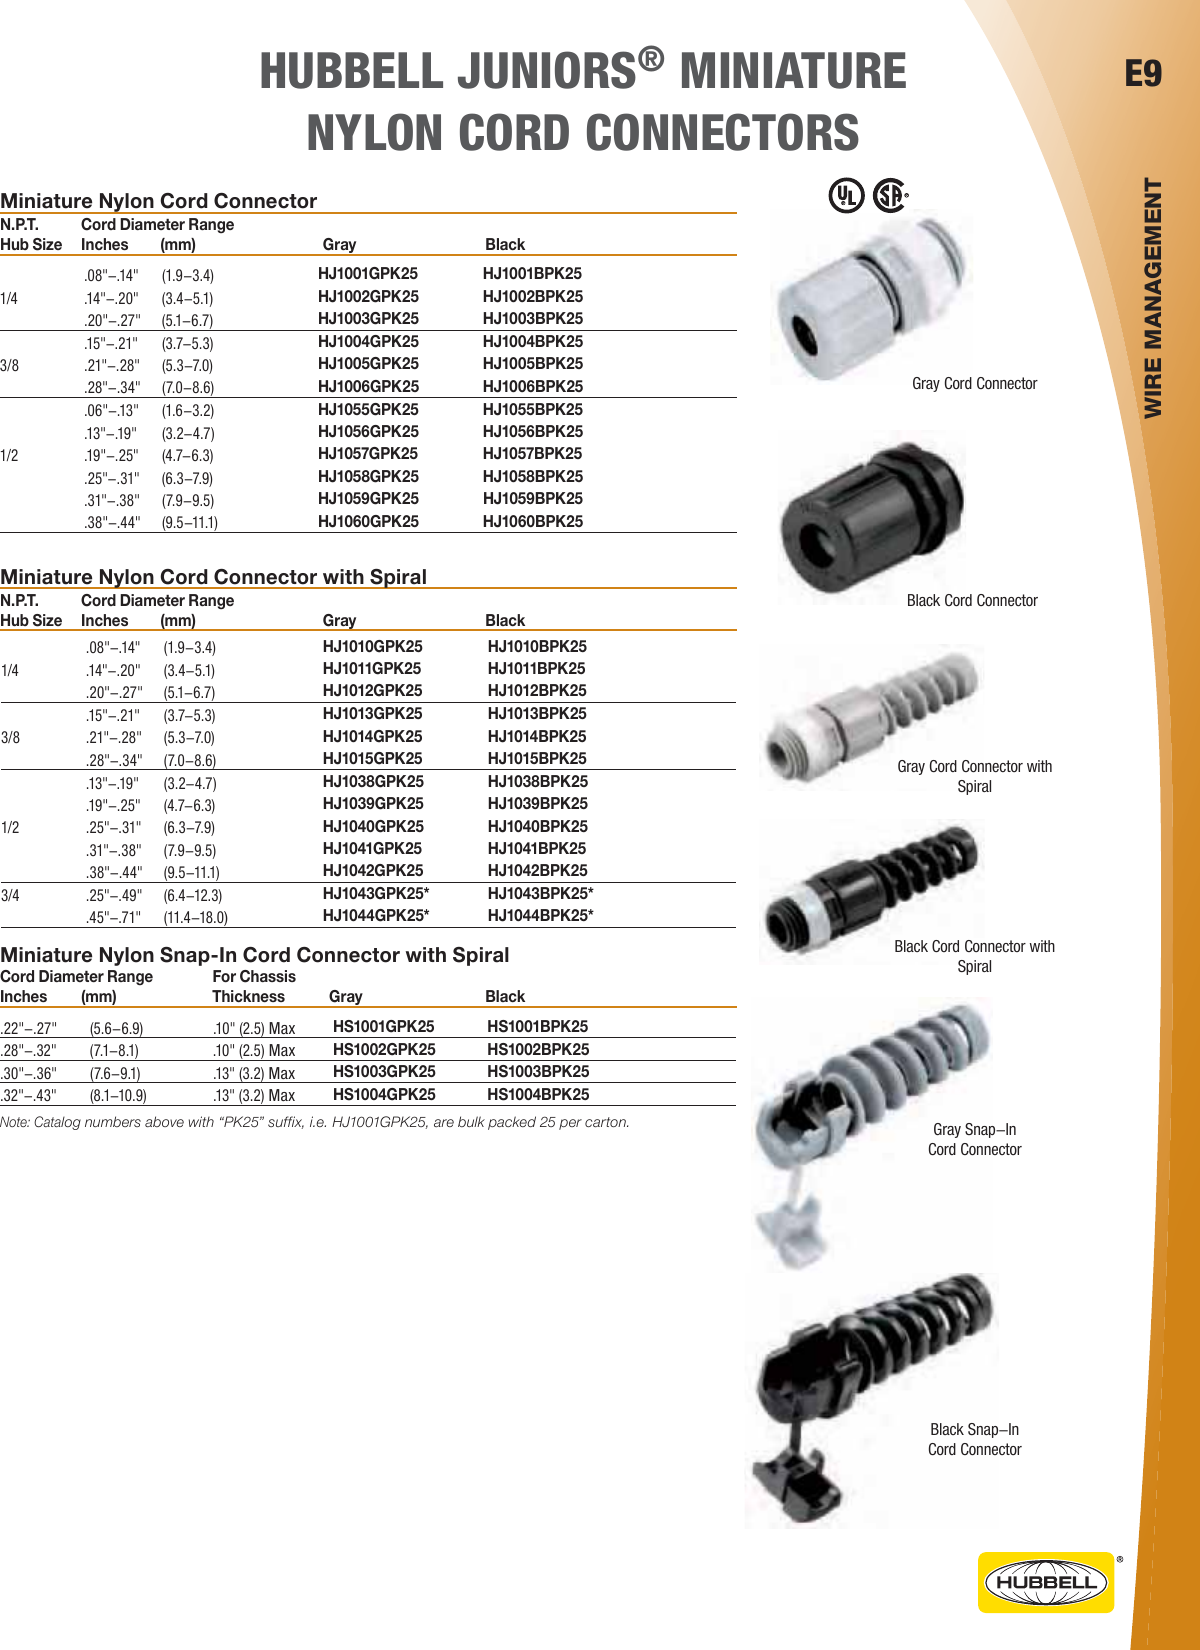 Page 9 of 12 - 1000439559-Catalog